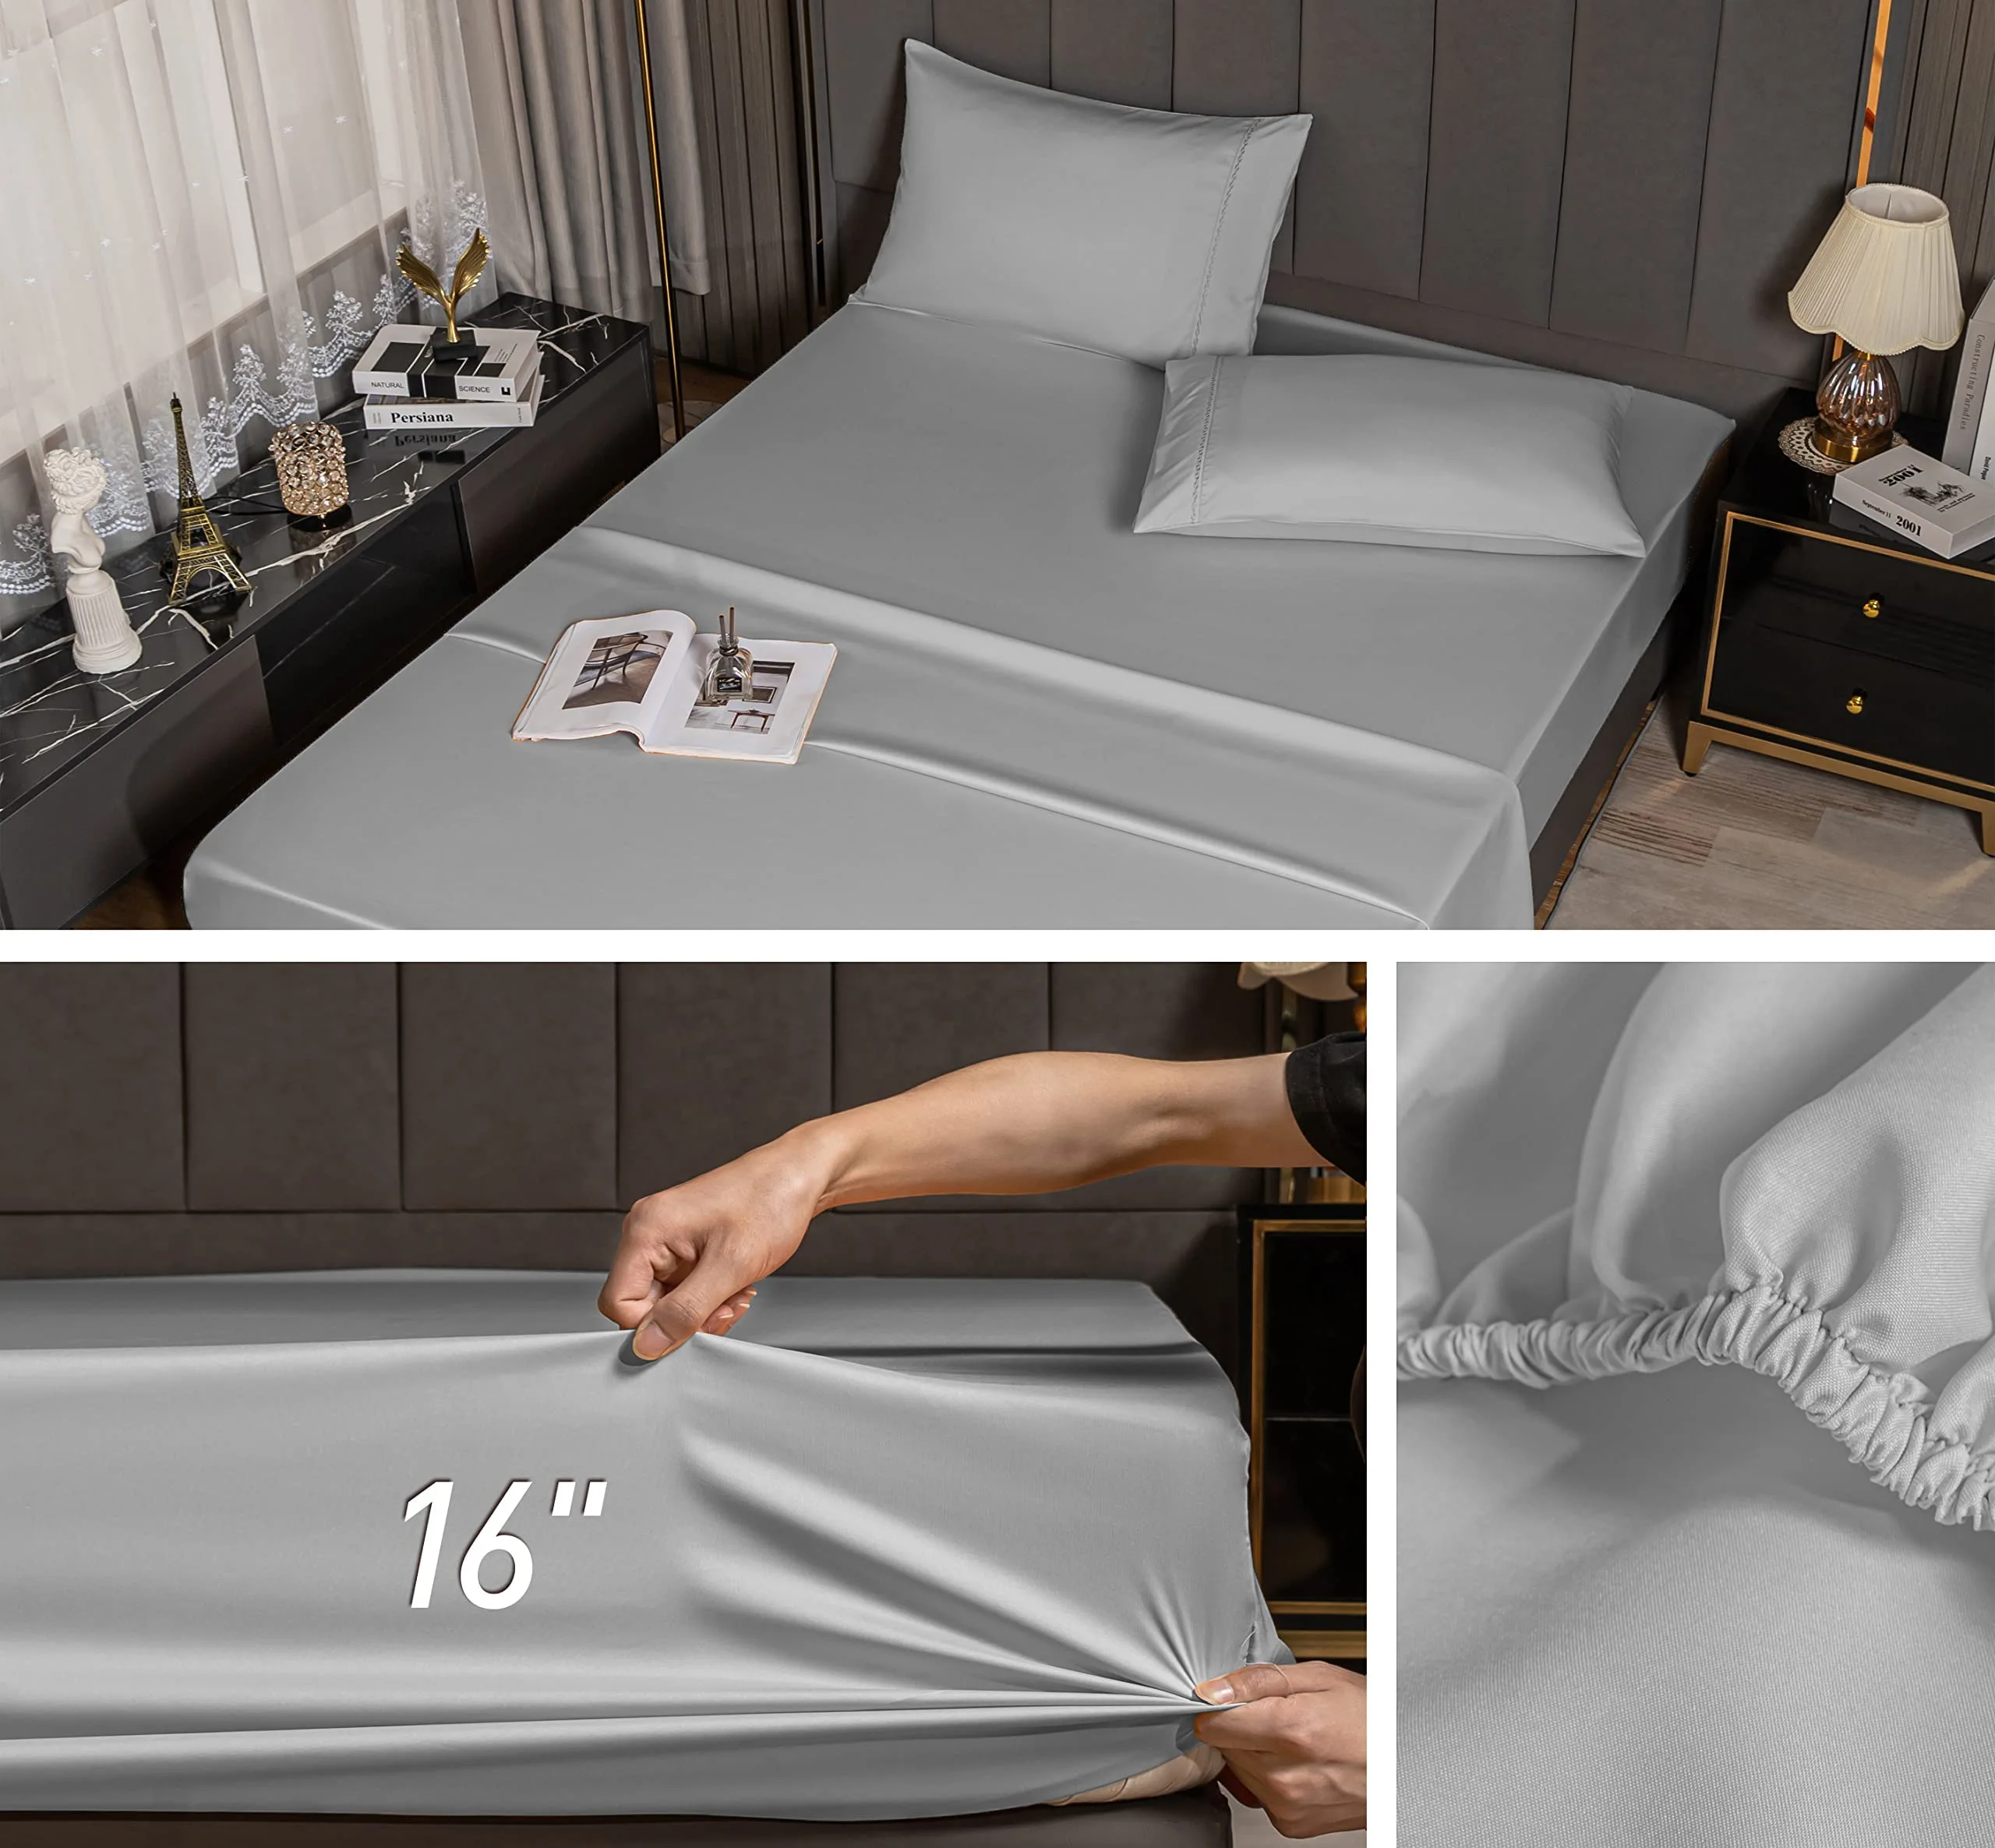 Miracle Sheets Reviews: Is It Really Comfortable Sheets And Feel Relax?